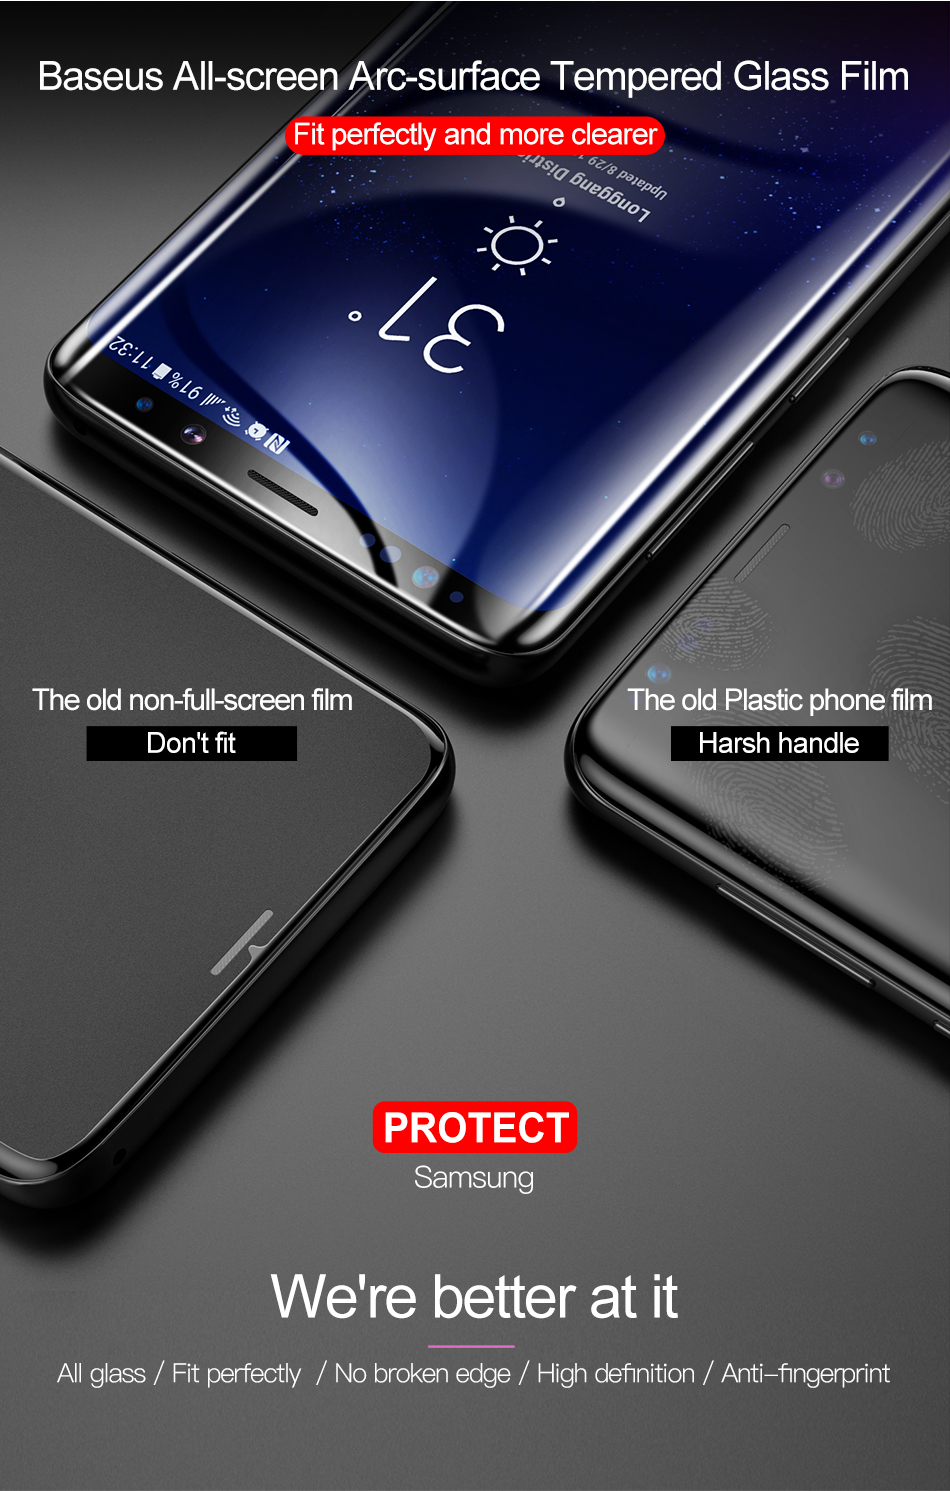 Baseus-03mm-All-Screen-Arc-surface-Tempered-Glass-Screen-Protector-for-Samsung-Galaxy-S9-1276066-2